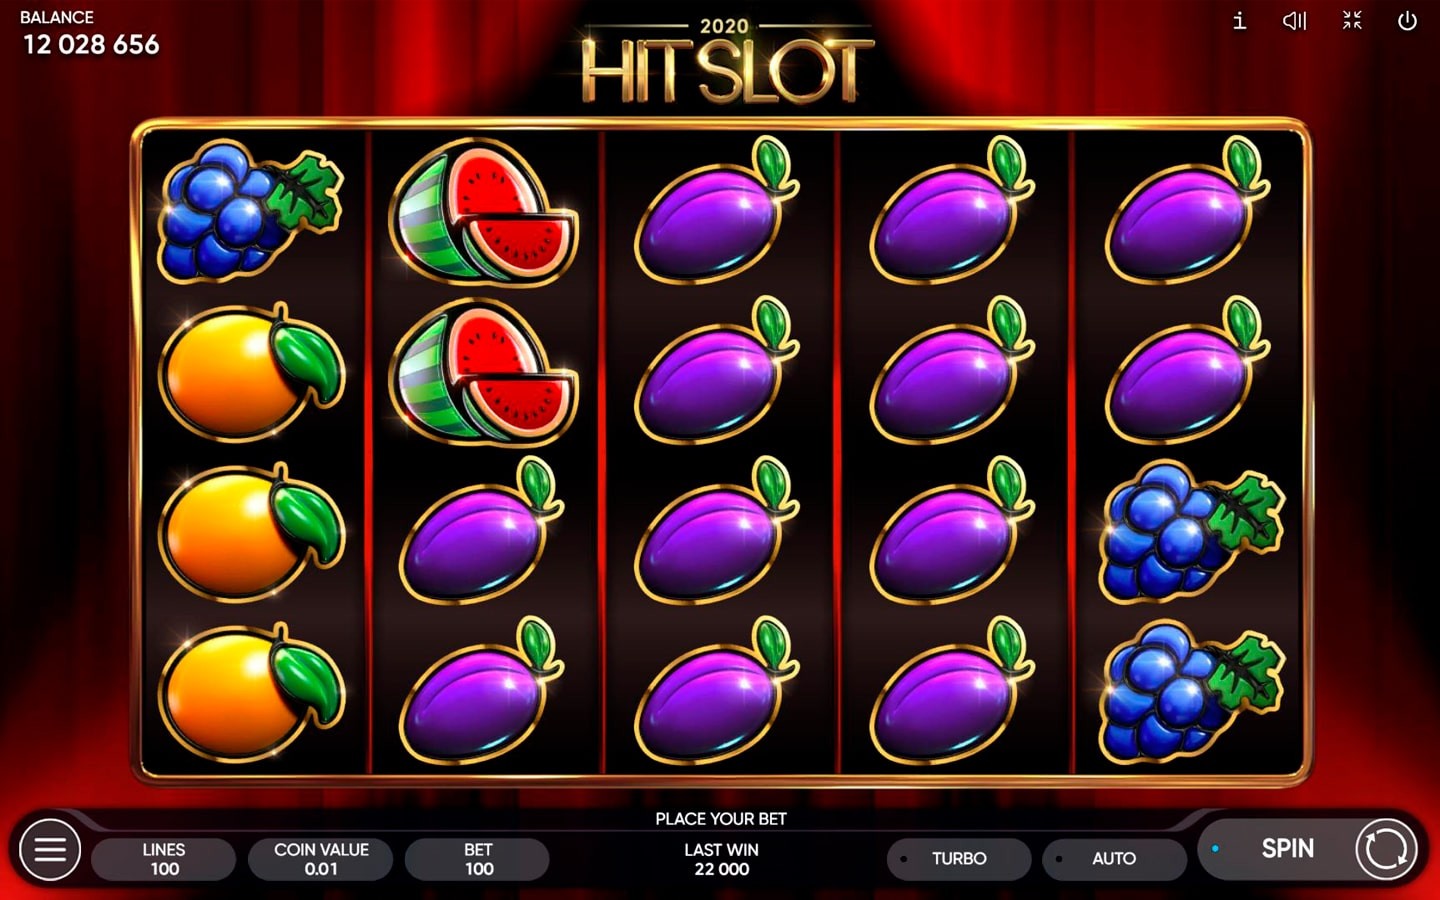 The Different Themes and Features of Slot Online Games